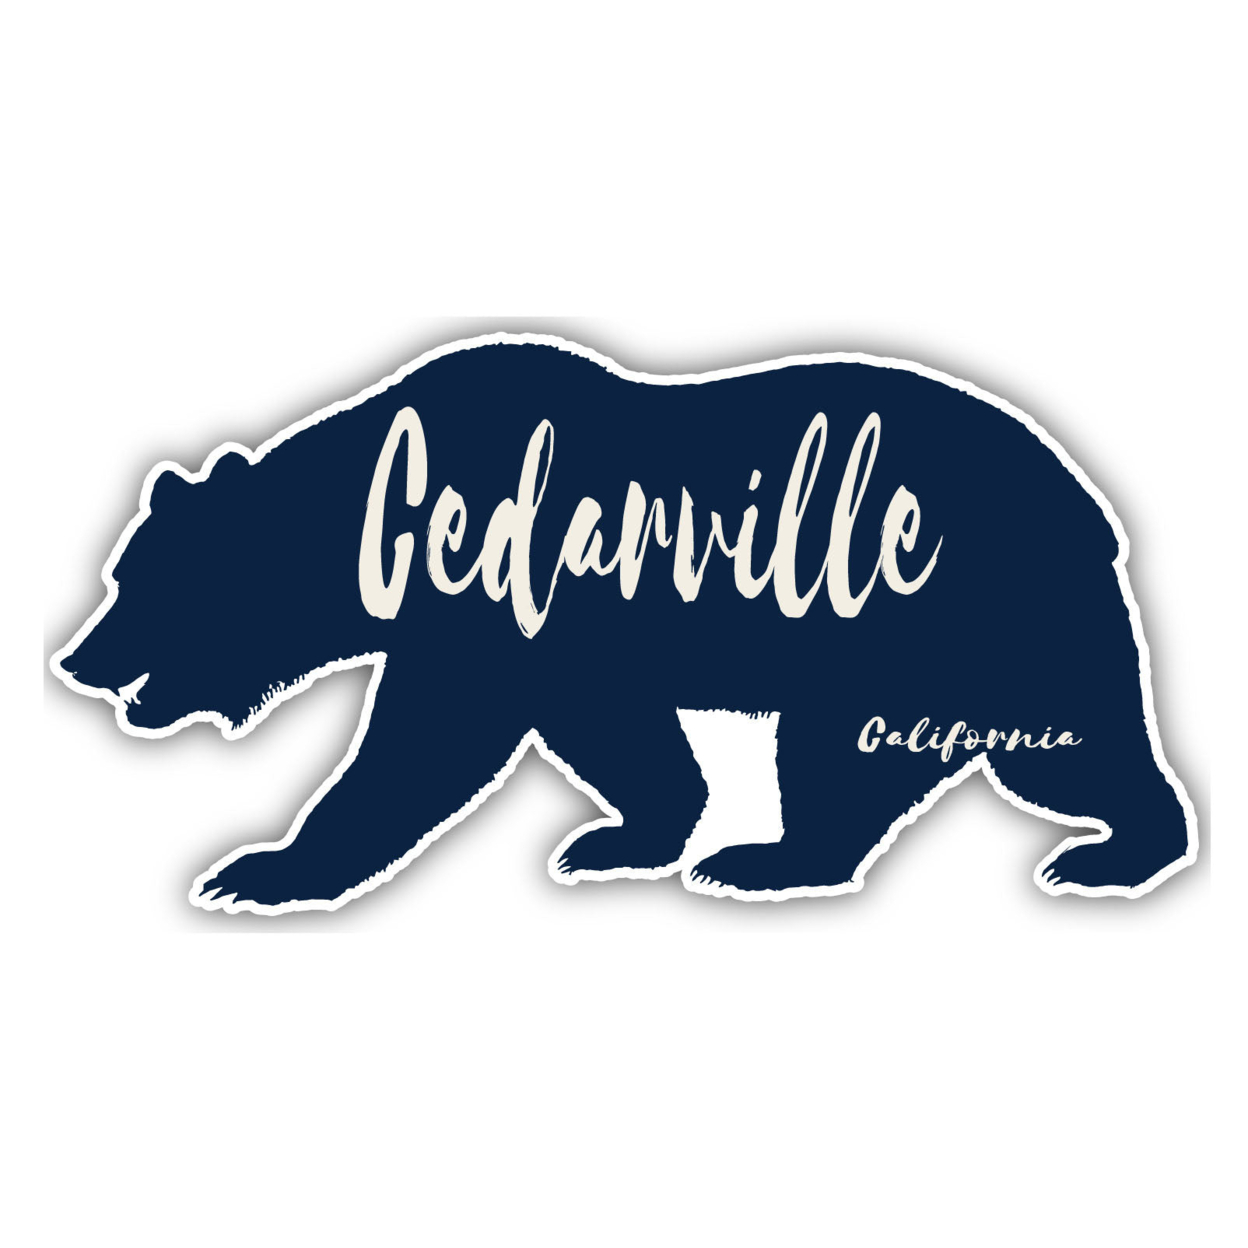 Cedarville California Souvenir Decorative Stickers (Choose Theme And Size) - 4-Pack, 6-Inch, Bear